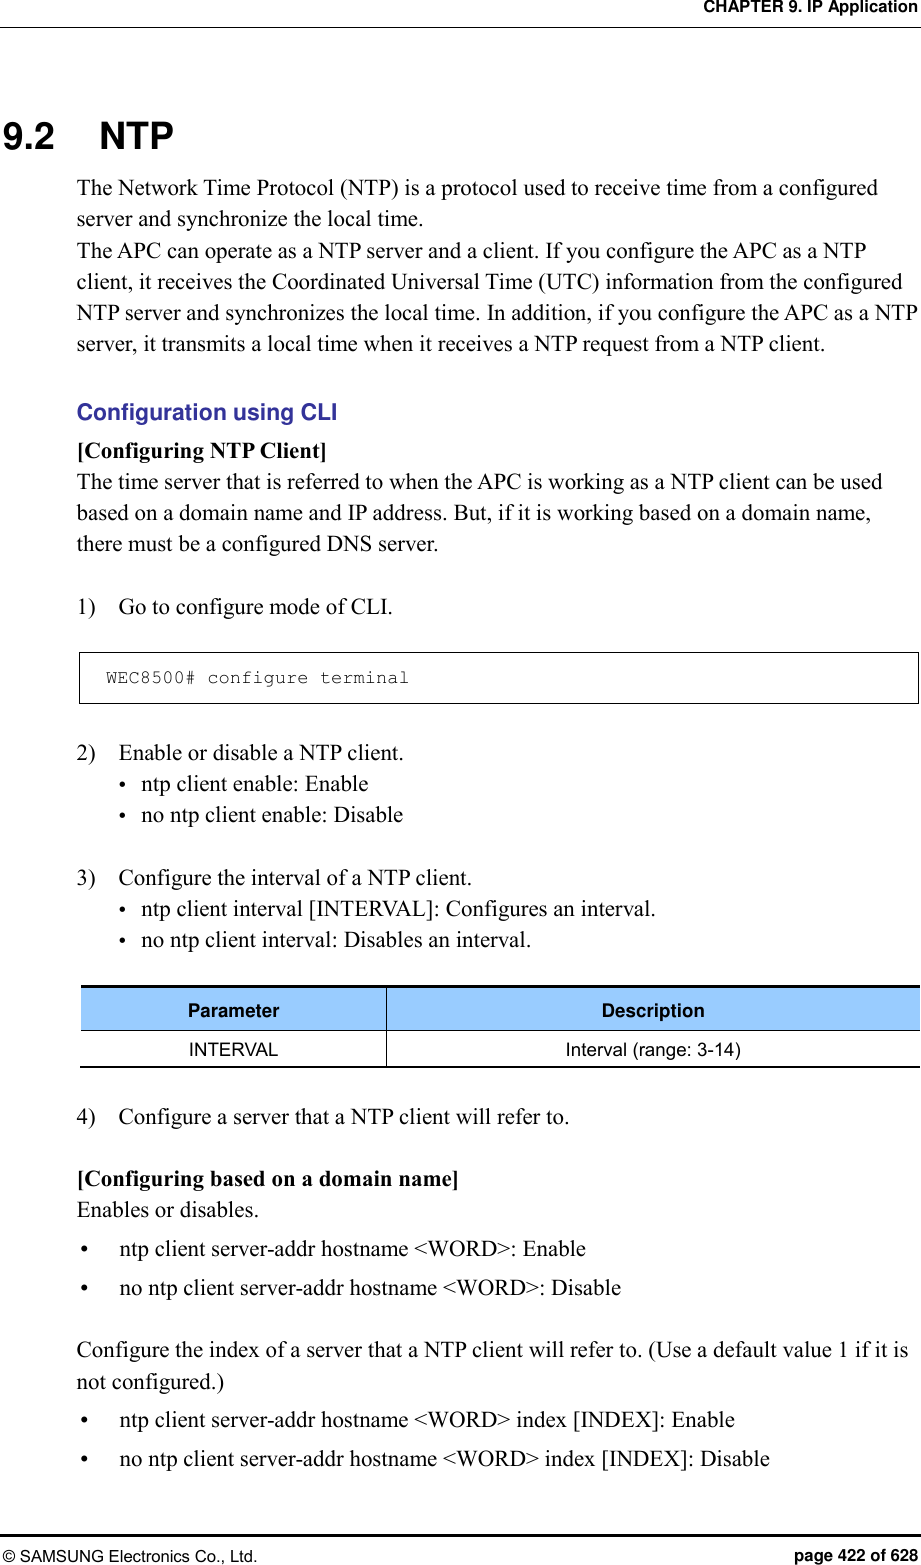 CHAPTER 9. IP Application © SAMSUNG Electronics Co., Ltd.  page 422 of 628 9.2  NTP The Network Time Protocol (NTP) is a protocol used to receive time from a configured server and synchronize the local time.   The APC can operate as a NTP server and a client. If you configure the APC as a NTP client, it receives the Coordinated Universal Time (UTC) information from the configured NTP server and synchronizes the local time. In addition, if you configure the APC as a NTP server, it transmits a local time when it receives a NTP request from a NTP client.    Configuration using CLI [Configuring NTP Client] The time server that is referred to when the APC is working as a NTP client can be used based on a domain name and IP address. But, if it is working based on a domain name, there must be a configured DNS server.    1)    Go to configure mode of CLI.  WEC8500# configure terminal  2)    Enable or disable a NTP client.  ntp client enable: Enable  no ntp client enable: Disable  3)    Configure the interval of a NTP client.  ntp client interval [INTERVAL]: Configures an interval.  no ntp client interval: Disables an interval.  Parameter Description INTERVAL Interval (range: 3-14)  4)    Configure a server that a NTP client will refer to.  [Configuring based on a domain name] Enables or disables.  ntp client server-addr hostname &lt;WORD&gt;: Enable  no ntp client server-addr hostname &lt;WORD&gt;: Disable  Configure the index of a server that a NTP client will refer to. (Use a default value 1 if it is not configured.)  ntp client server-addr hostname &lt;WORD&gt; index [INDEX]: Enable  no ntp client server-addr hostname &lt;WORD&gt; index [INDEX]: Disable 